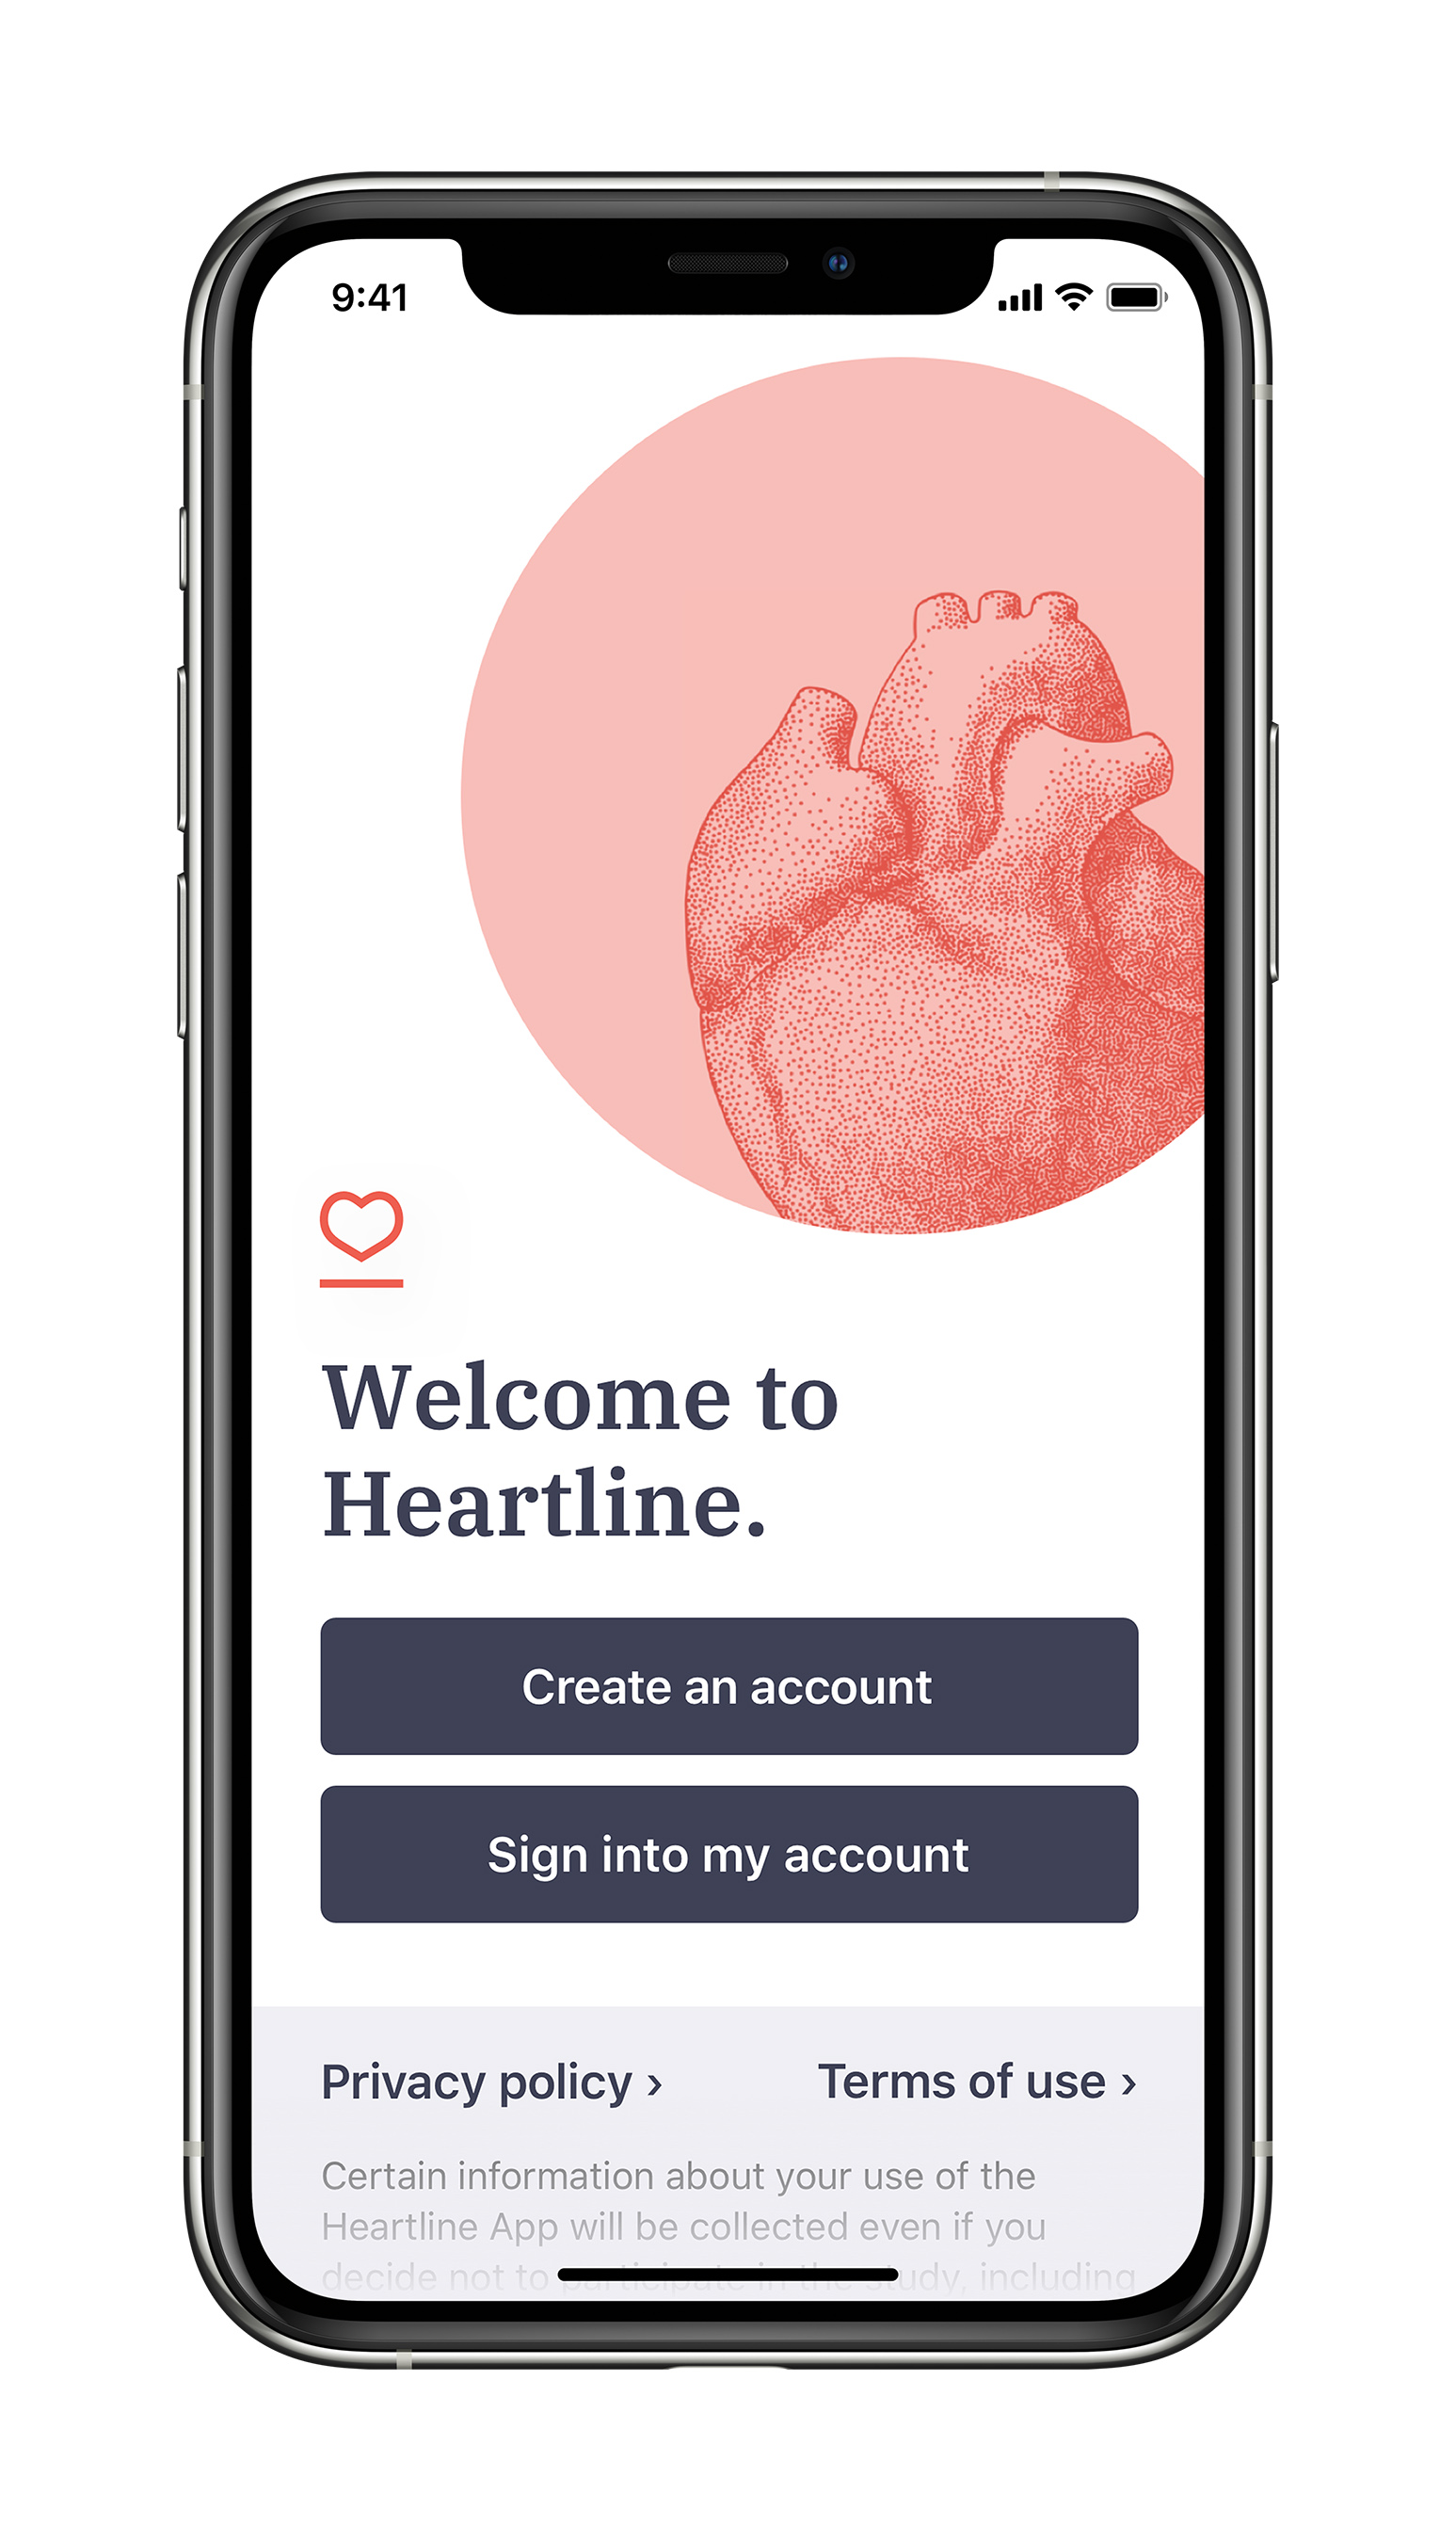 The Heartline™ Study from Johnson & Johnson, in collaboration with Apple, is now open for enrollment. Visit Heartline.com to see if you’re eligible to enroll.